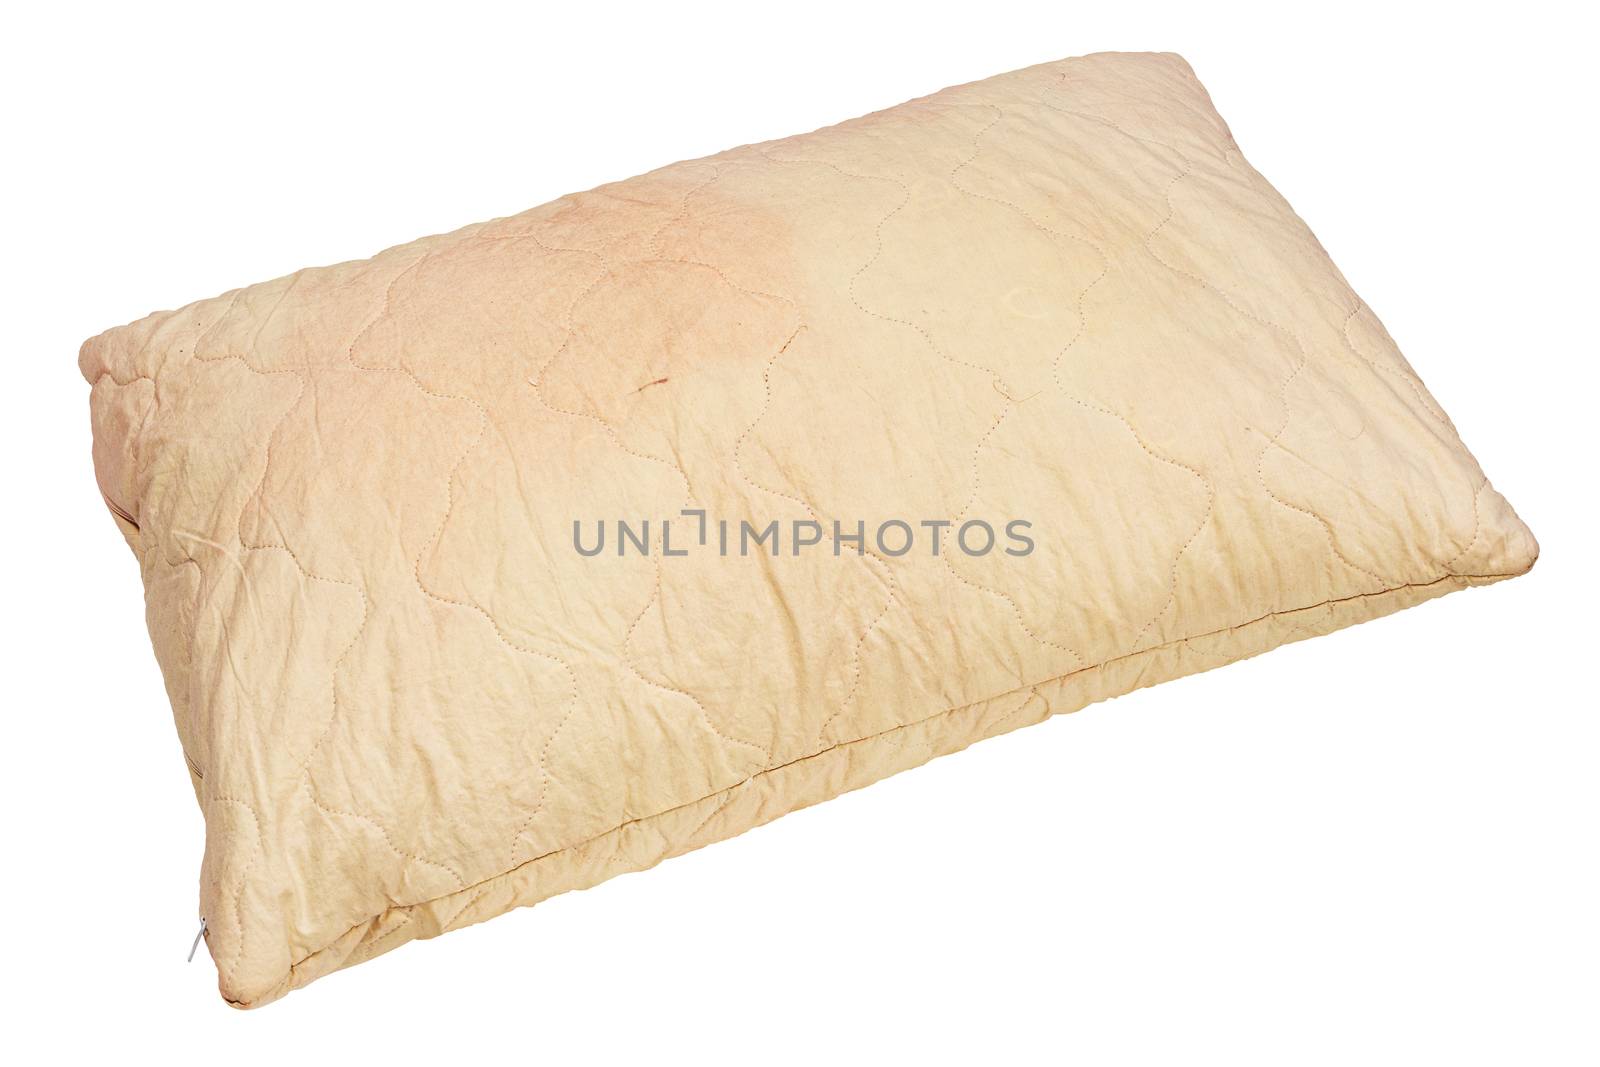 dirty used spotted pillow isolated on white background in diagonal composition.